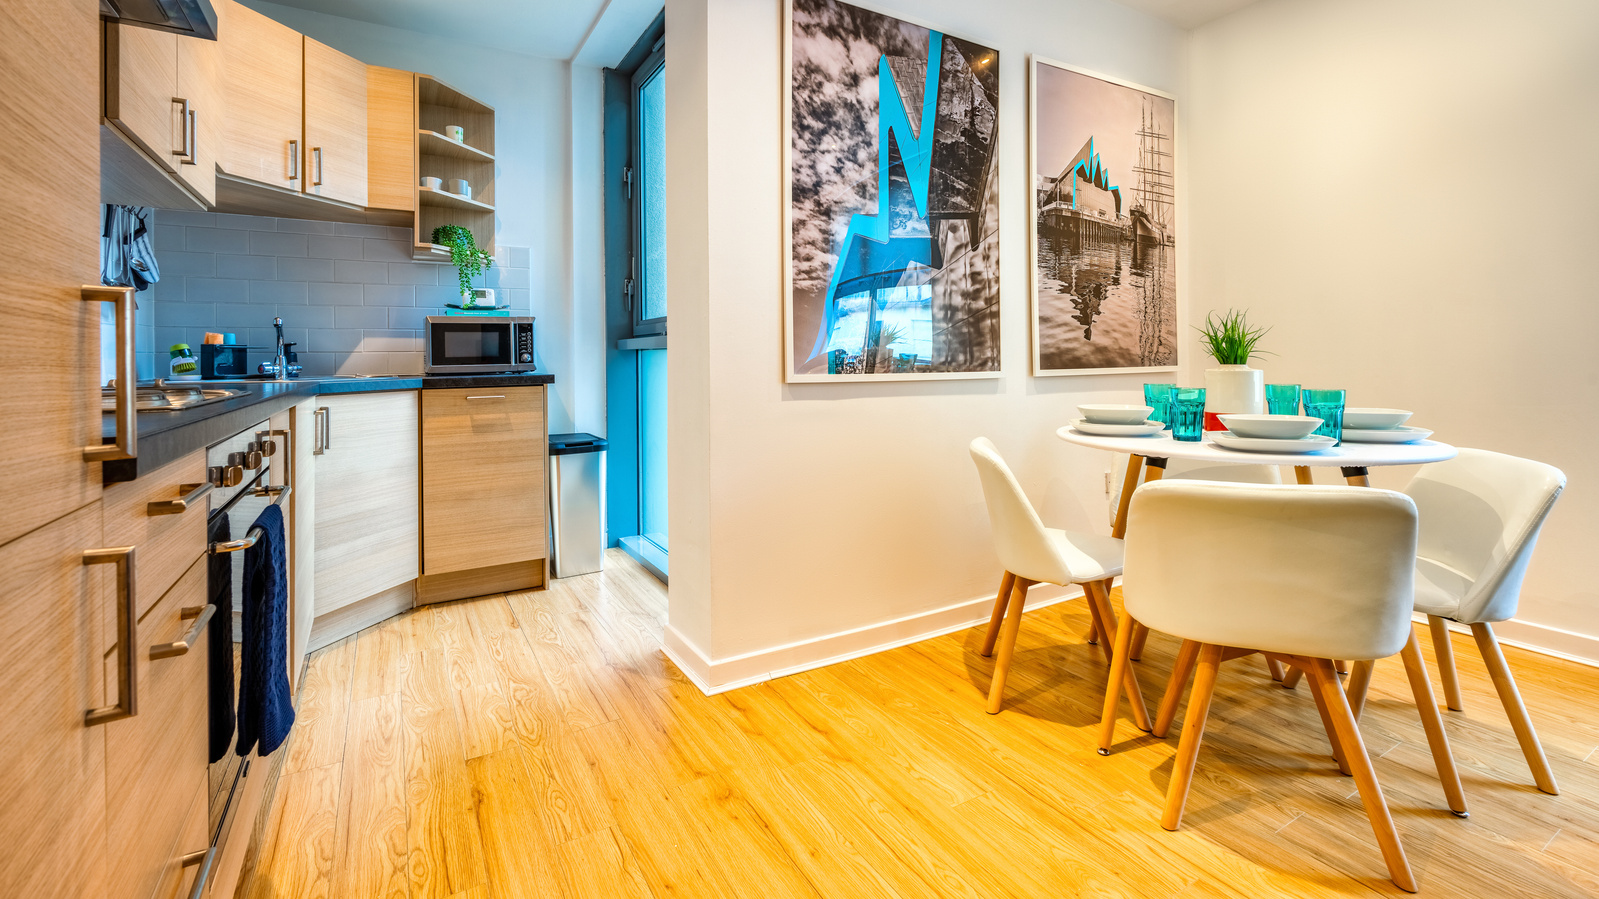 Dining Room for Scotland Interior Property in Glasgow - Photography by Nate Cleary